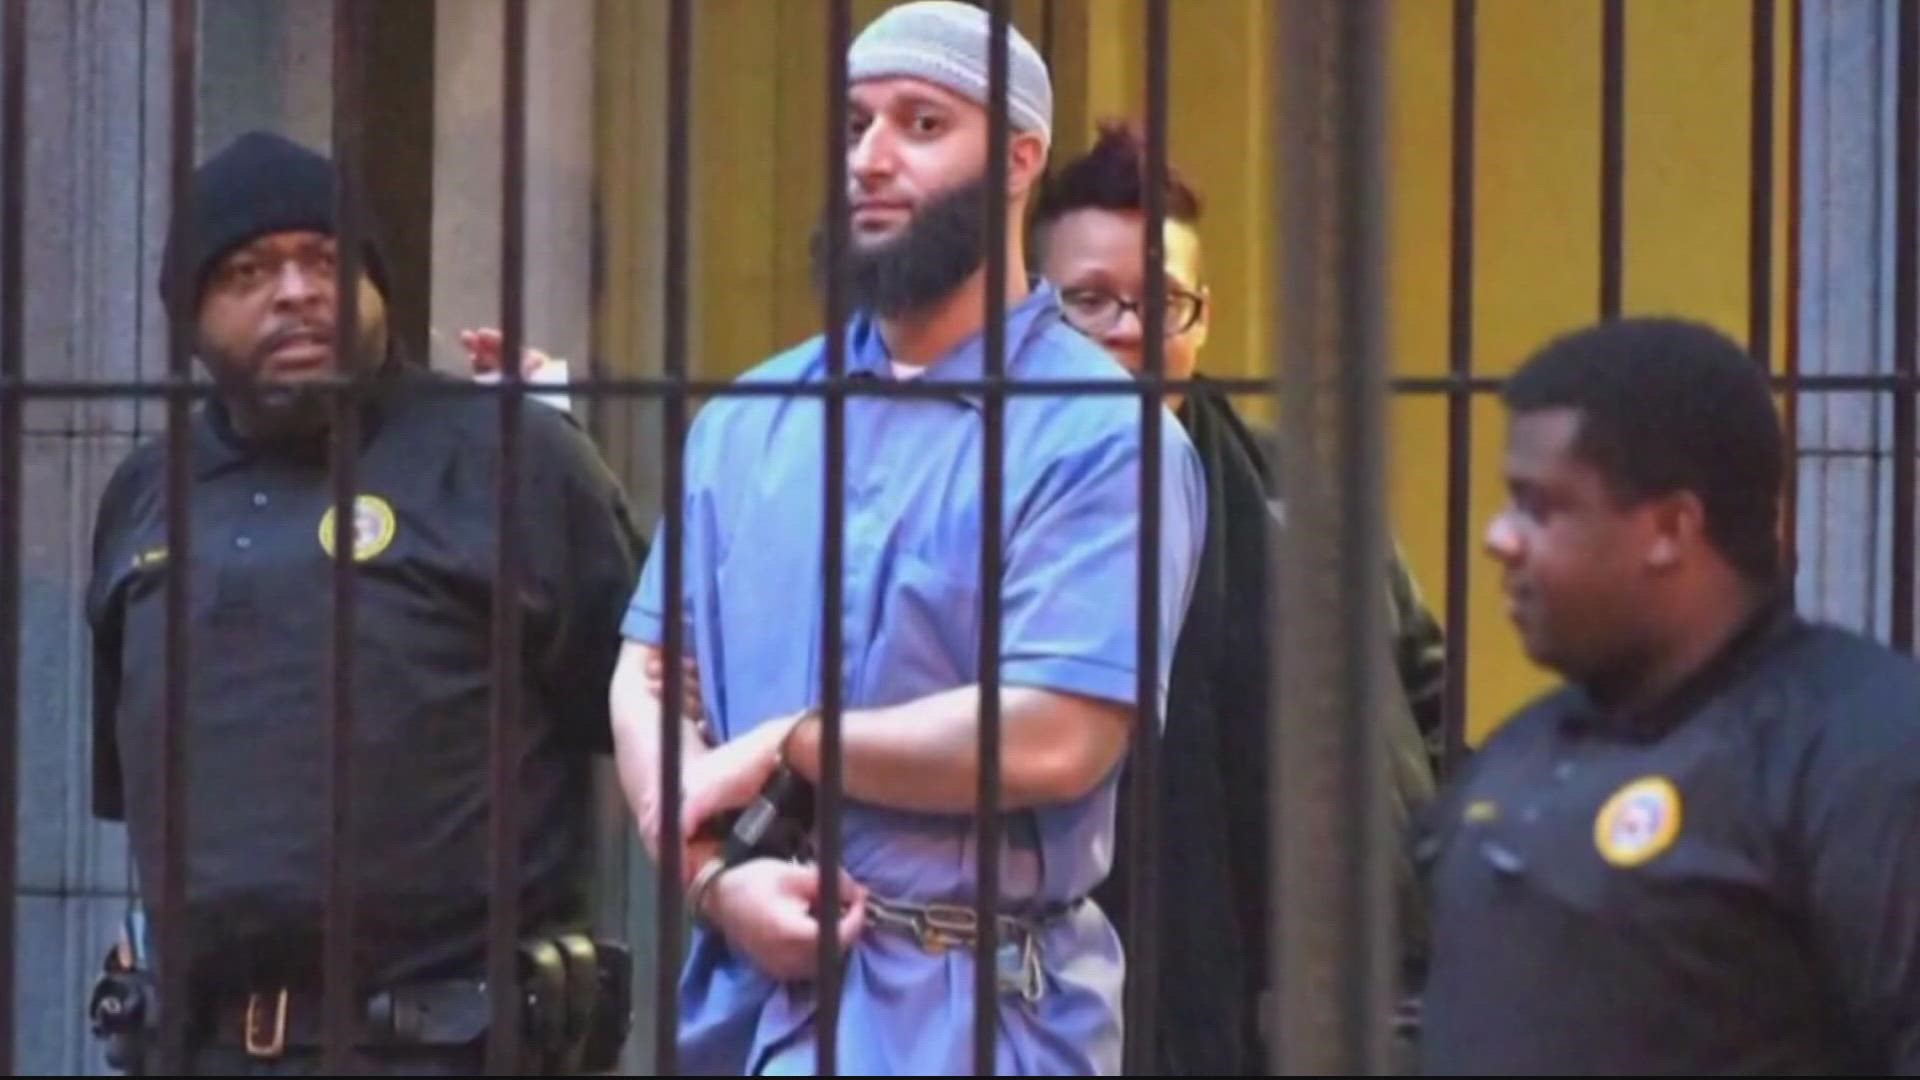 A Baltimore judge has ordered the release of Adnan Syed after overturning Syed’s conviction for a 1999 murder that was chronicled in the hit podcast “Serial.”